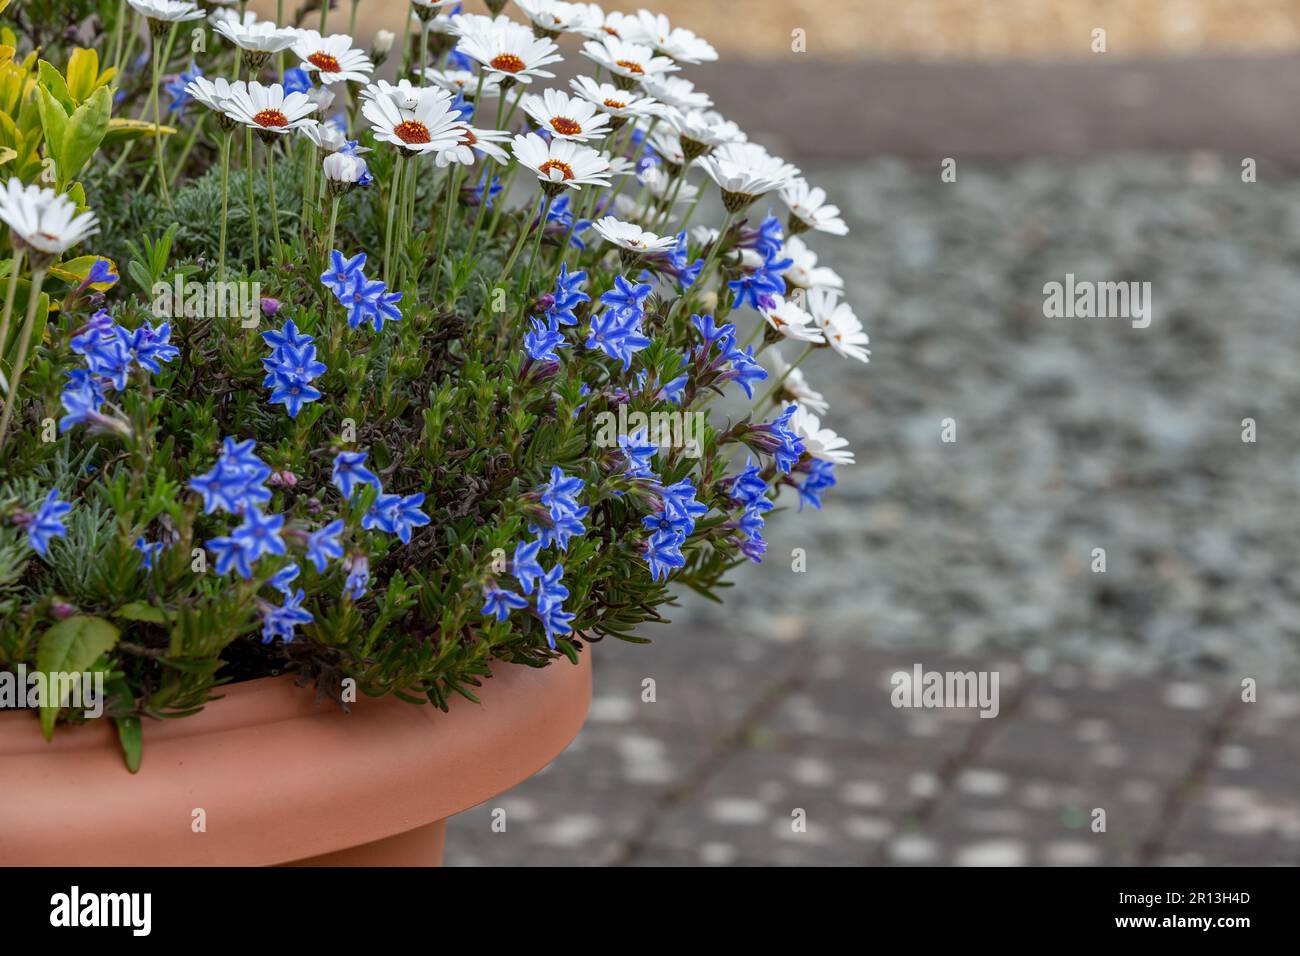 Moroccan Daisy and Lithodora Diffuser 'Star' planted together in a pot. Stock Photo